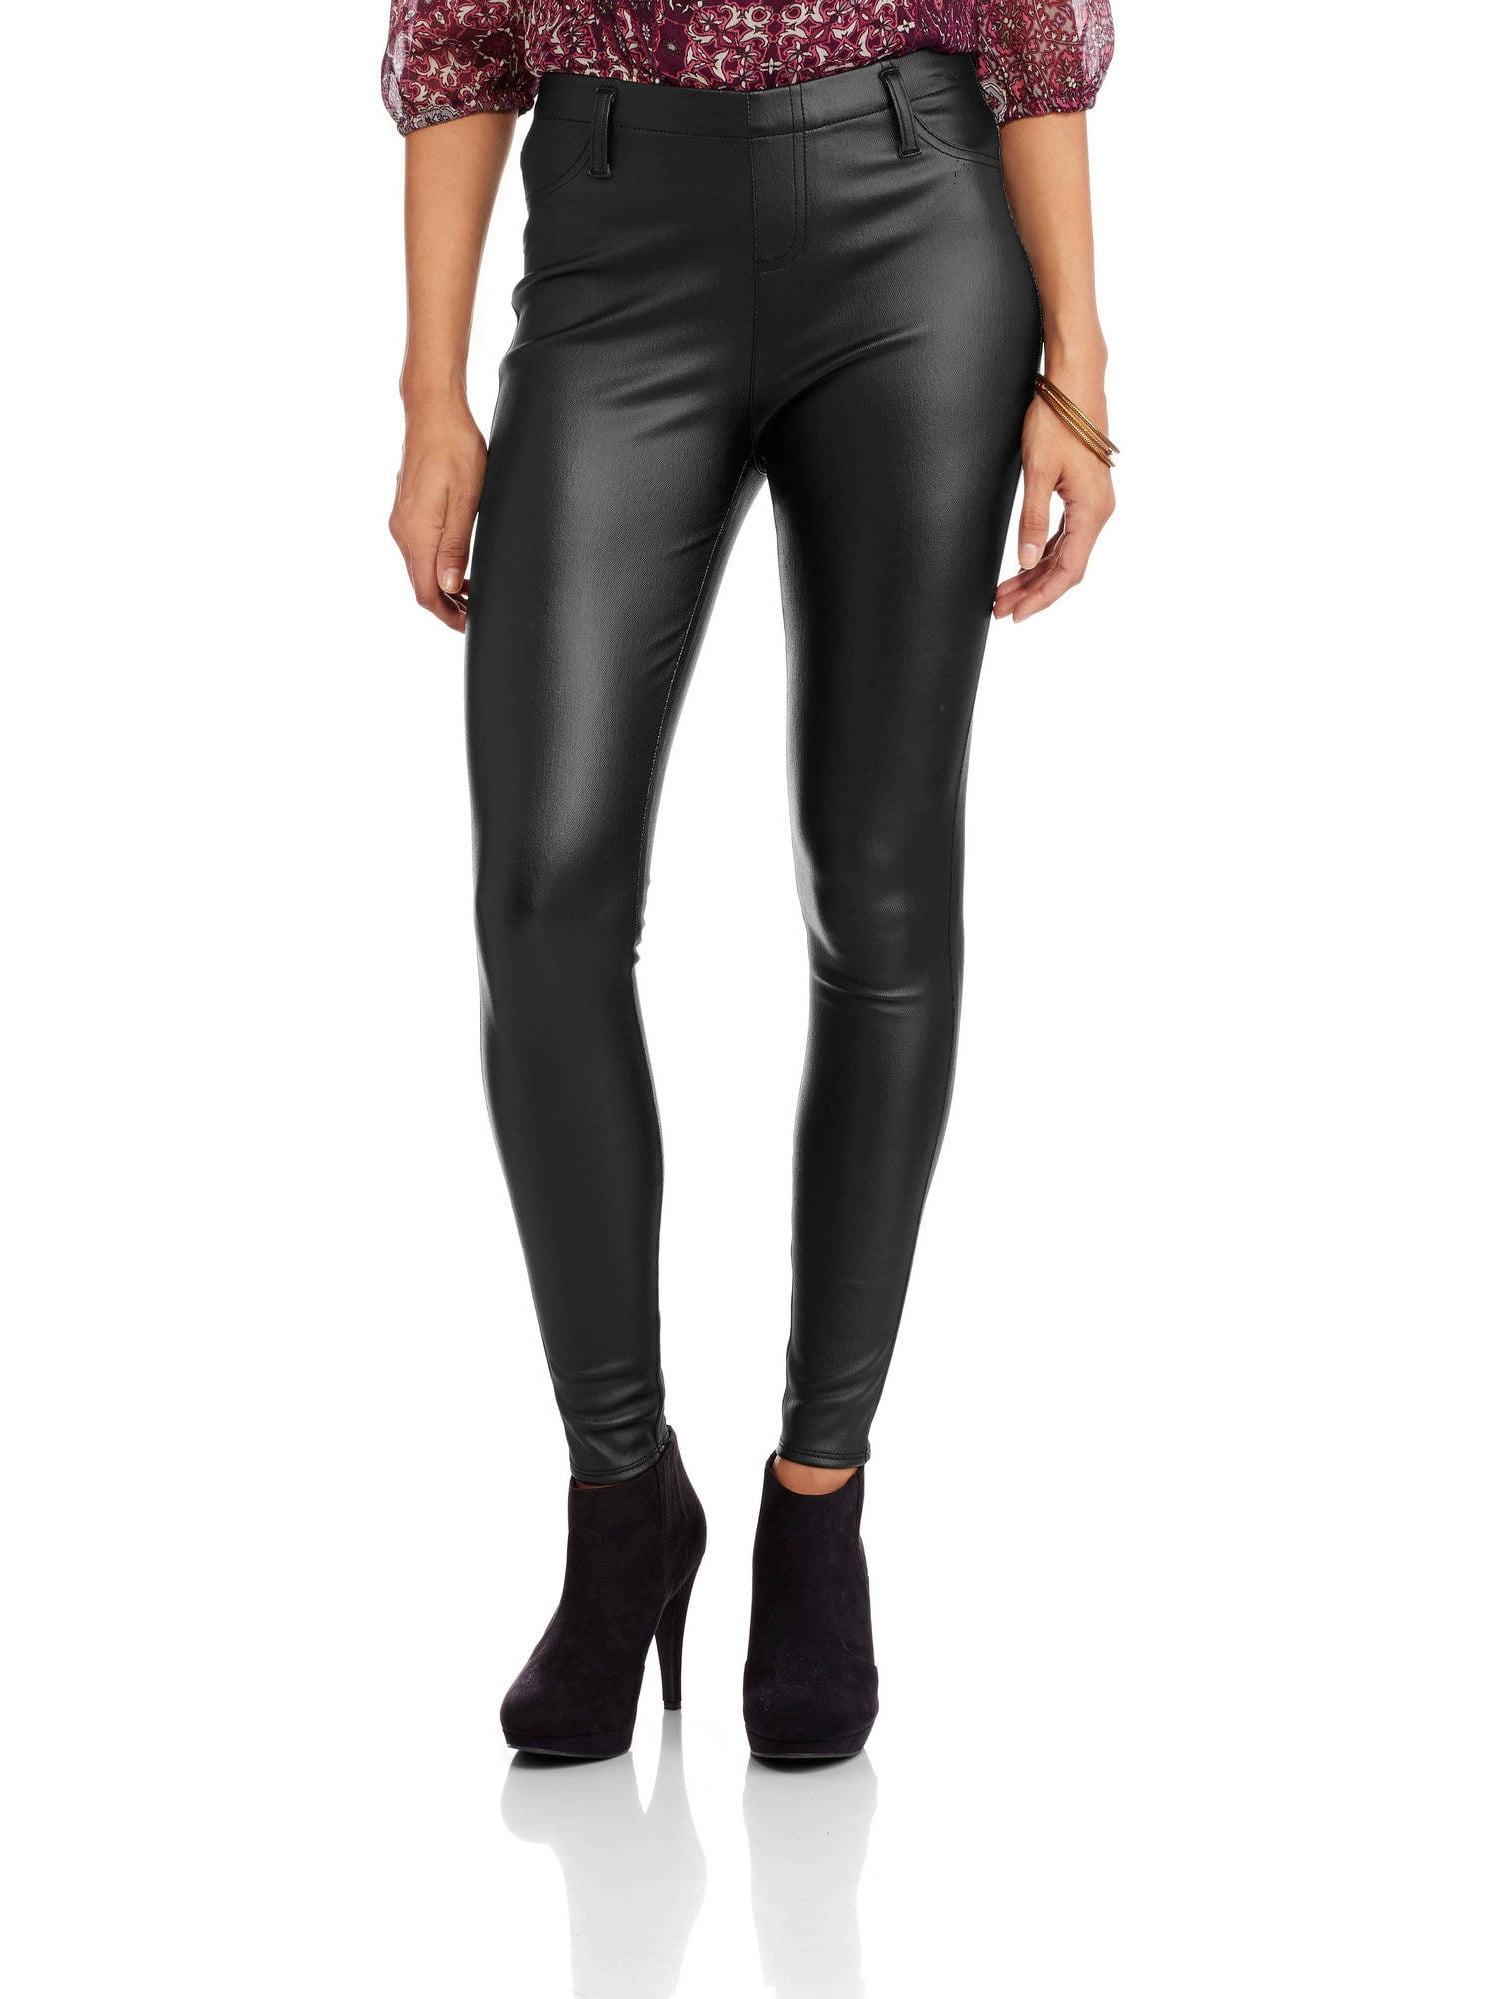 Faded Glory Fg All Over Coated Knit Jegging - Walmart.com